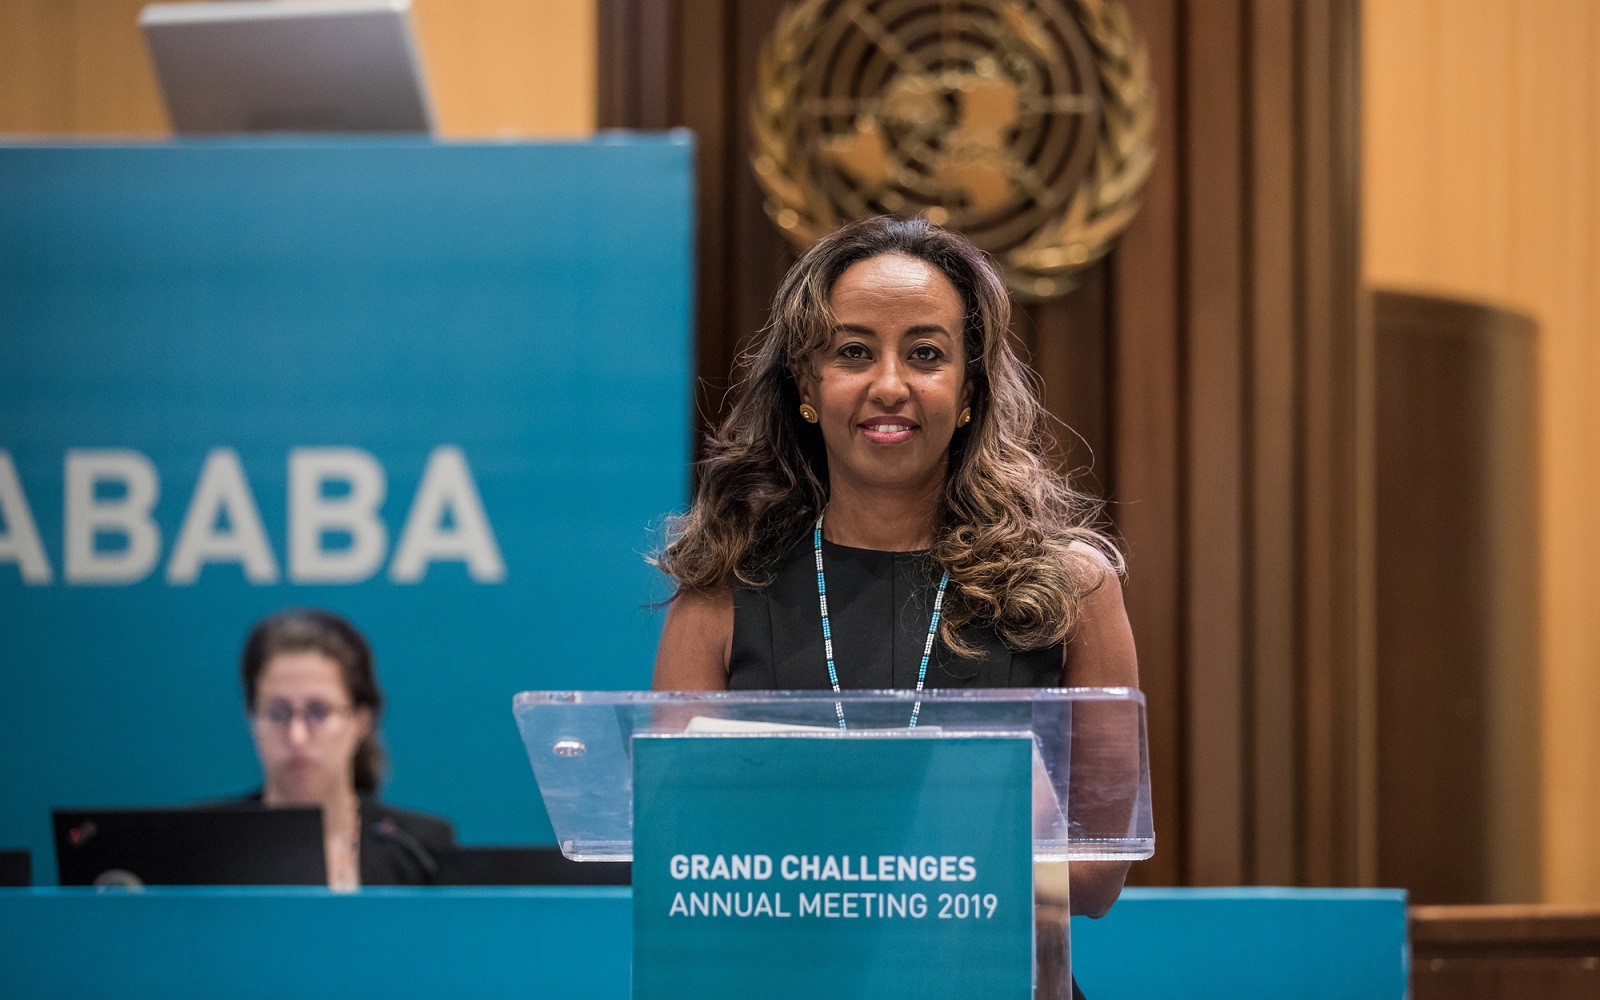 Kedest Tesfagiorgis Deputy Director, Global Partnerships & Grand Challenges, Bill & Melinda Gates Foundation delivers opening remarks at Grand Challenges Annual Meeting 2019 at the United Nations Conference Centre in Addis Ababa, Ethiopia on October 28, 2019.